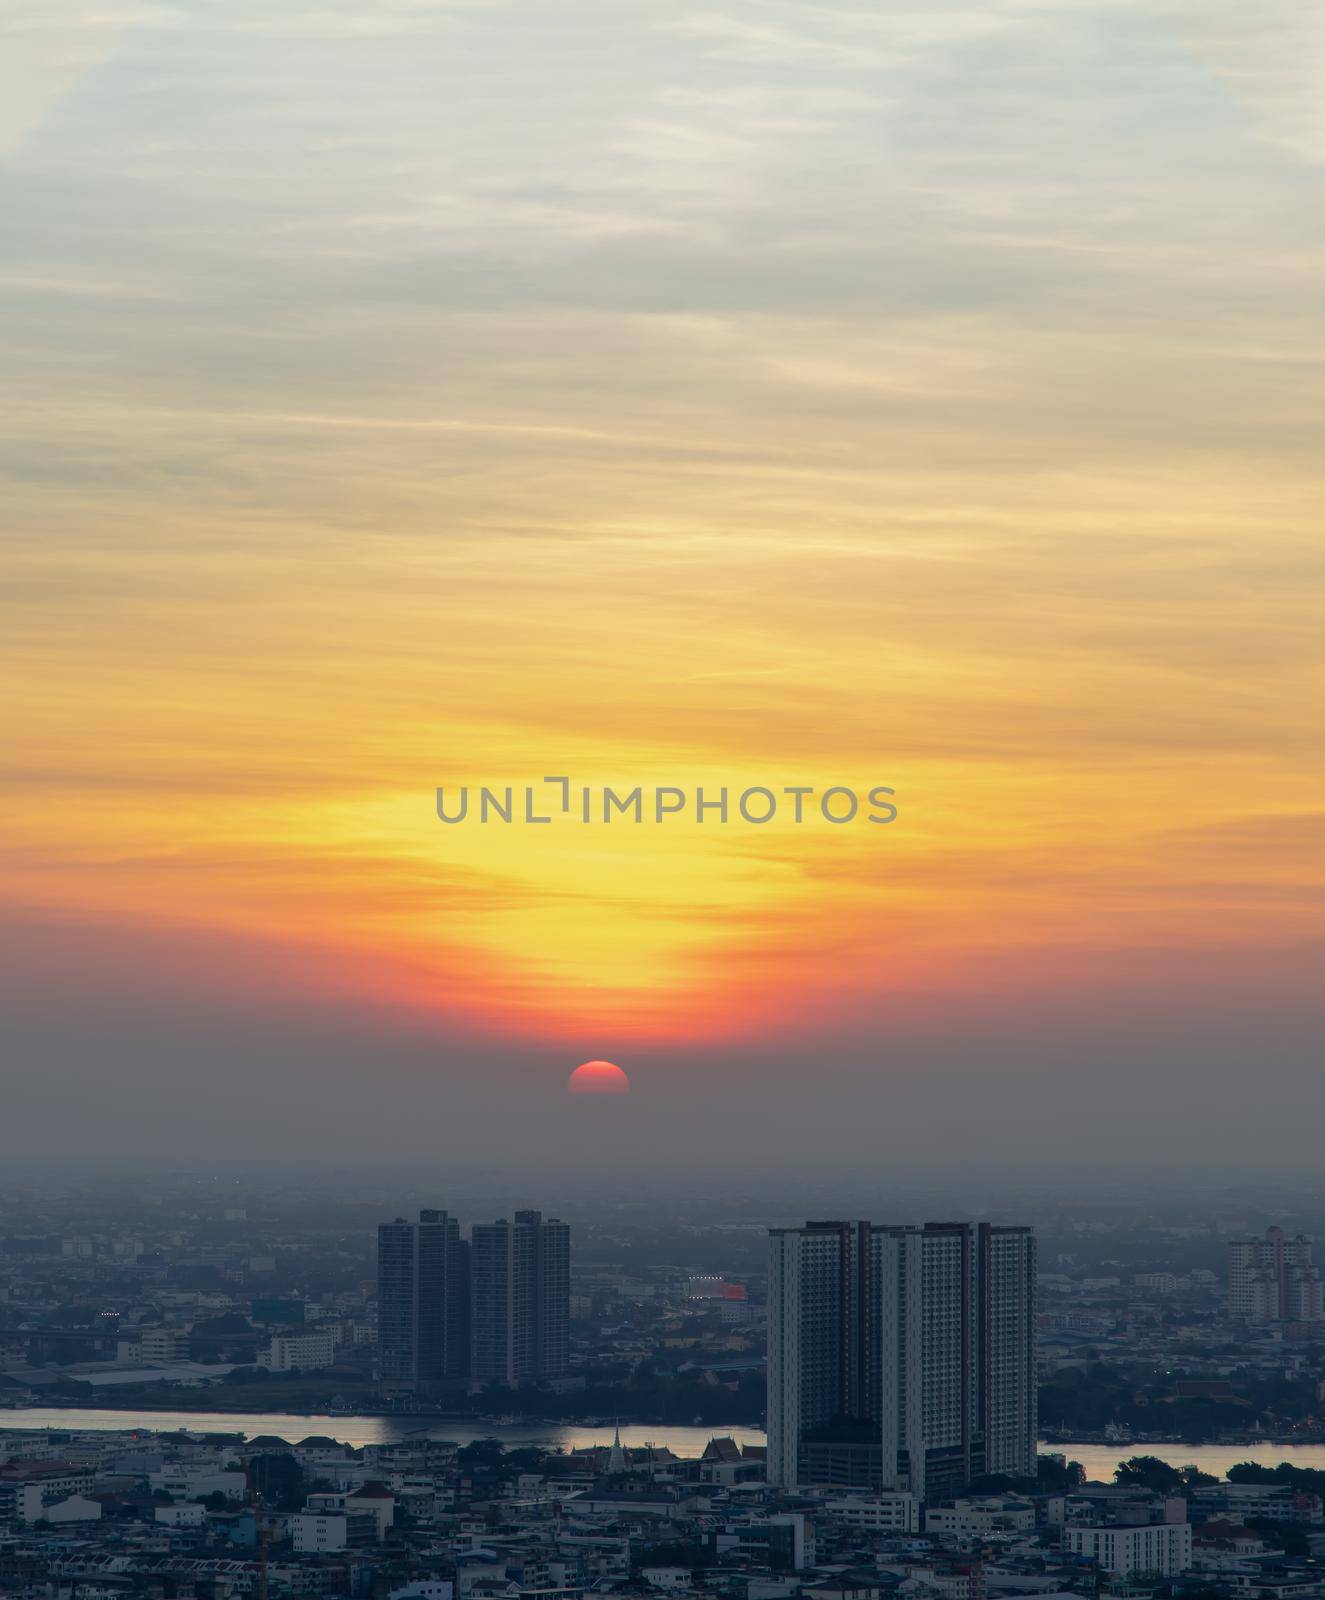 Bangkok, Thailand - Jan 10, 2021 : Aerial view of Amazing beautiful scenery view of Bangkok City skyline and skyscraper before sun setting creates relaxing feeling for the rest of the day. Evening time, Selective focus.